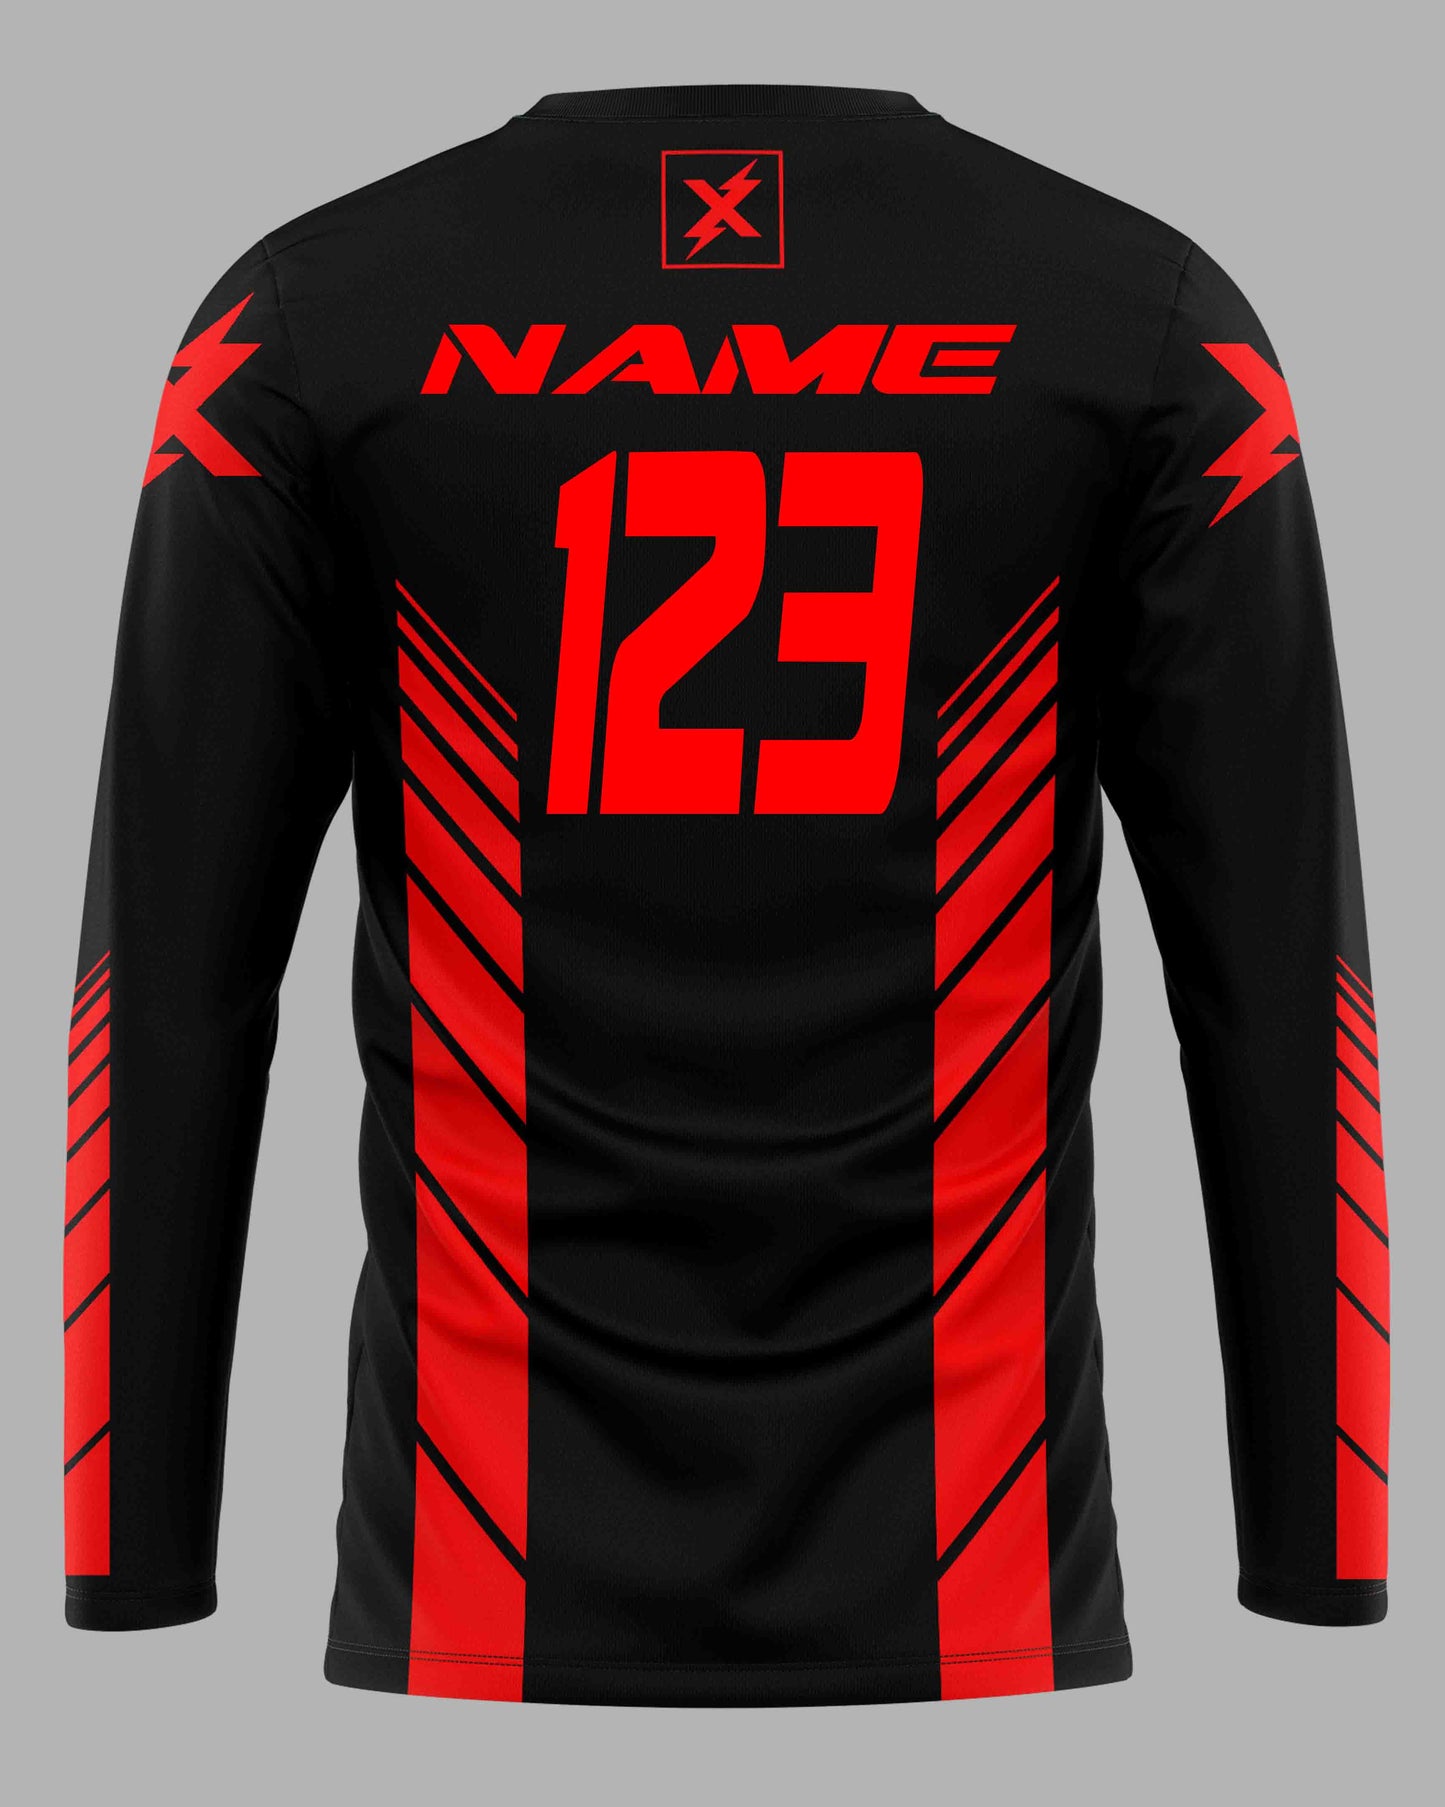 Jersey Speed Lines Black/Red - FREE Custom Sublimation